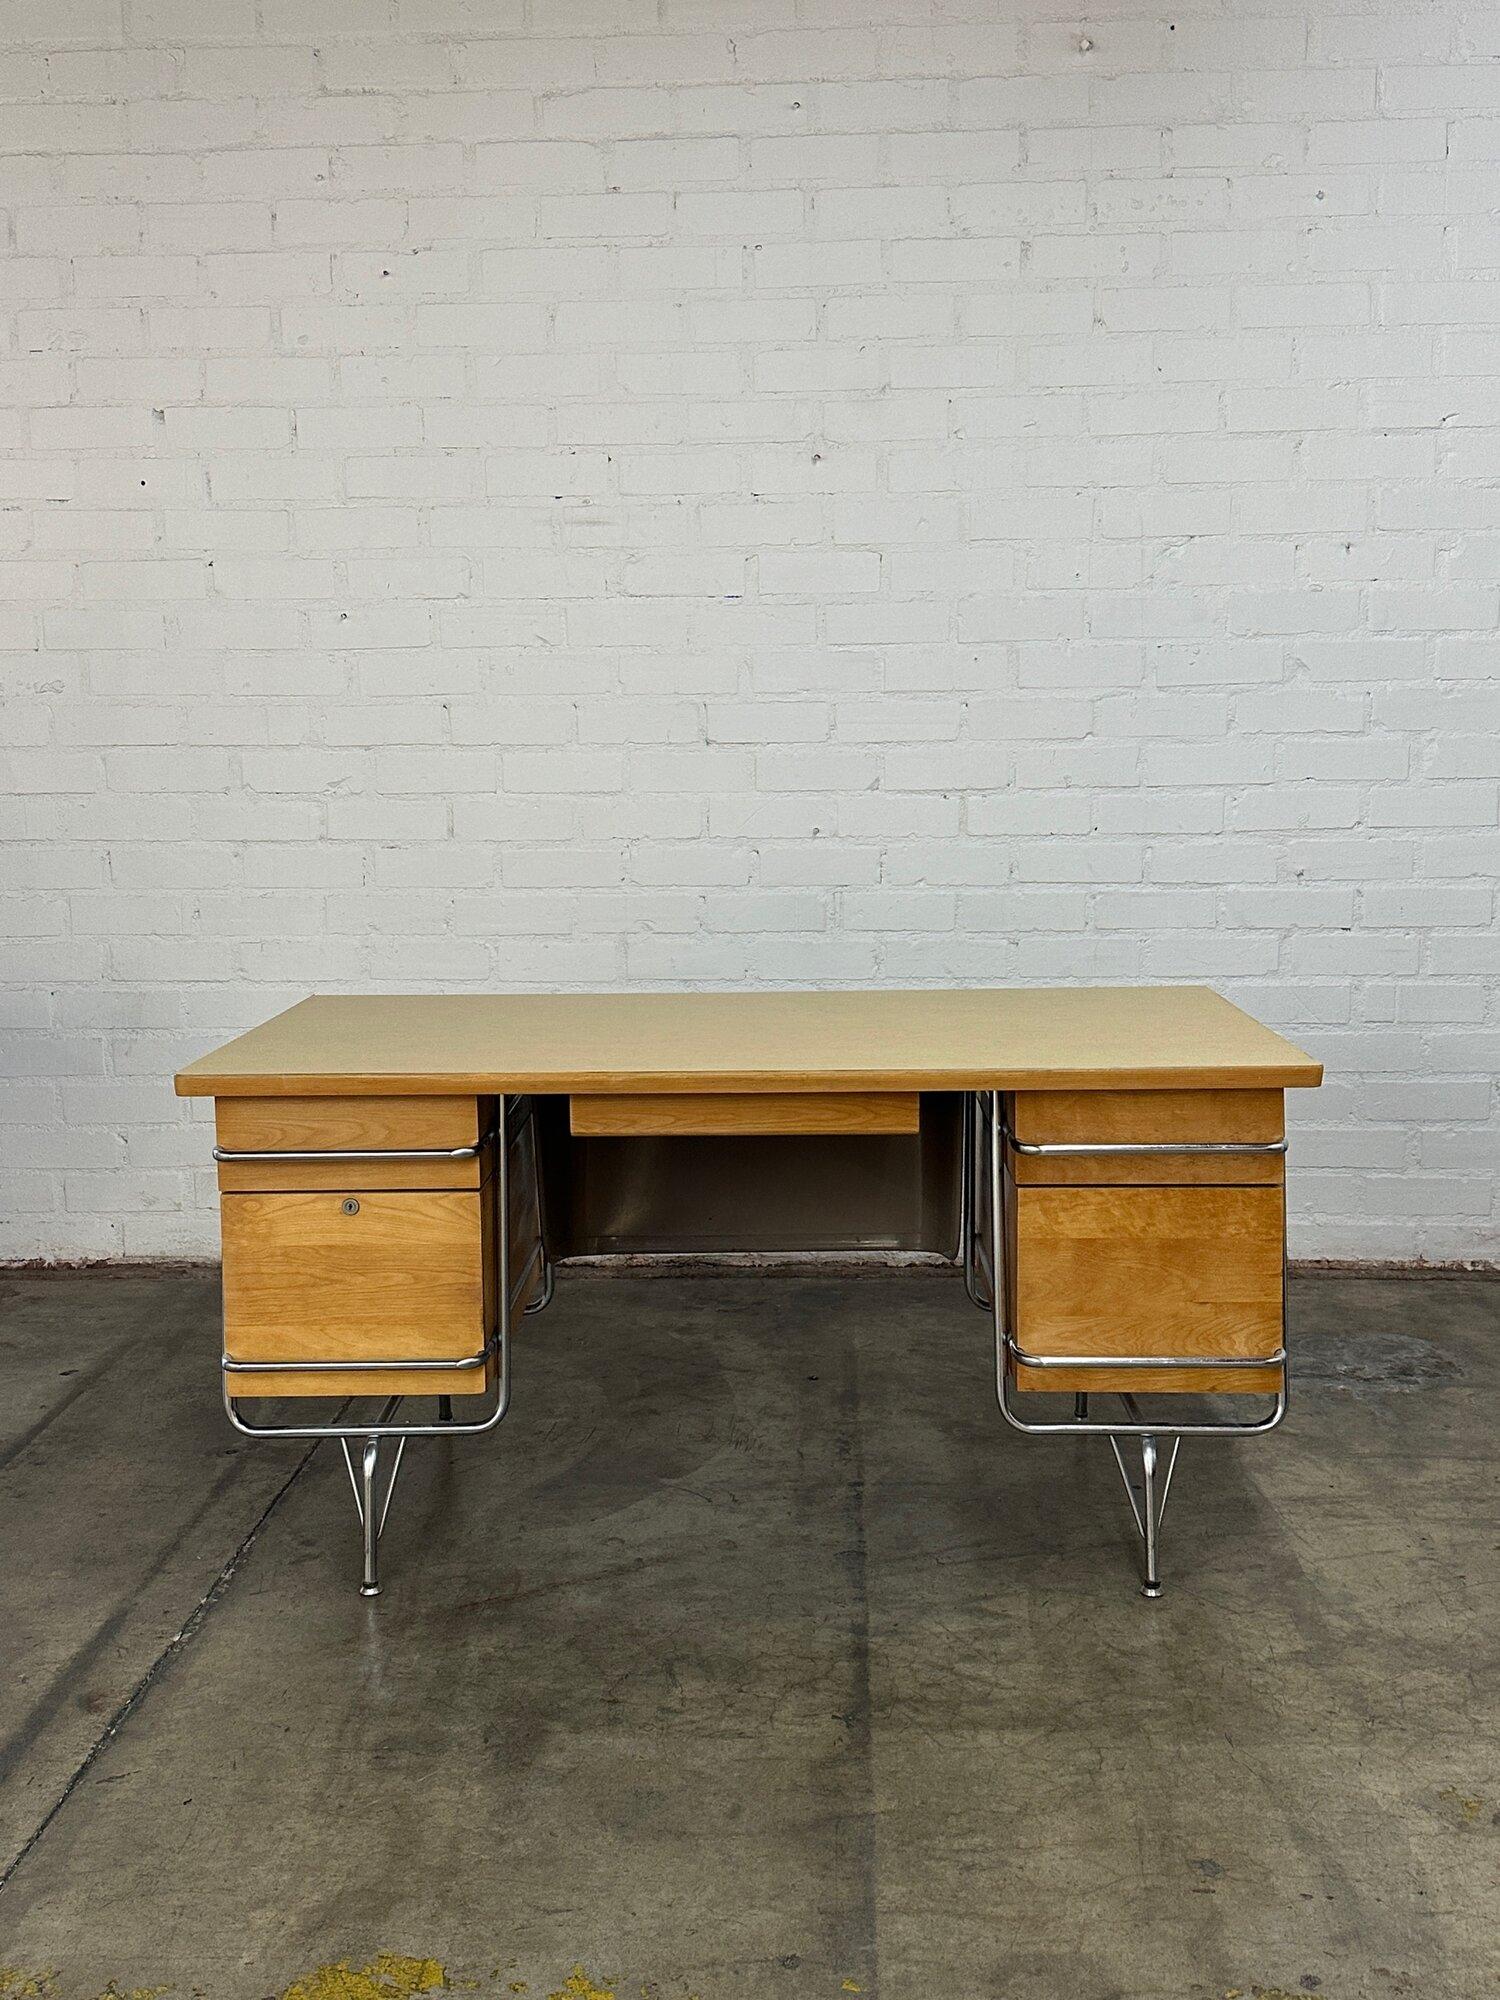 W59.5 D29.5 H29.5

Fully refinished Mid Century modern desk designed by Kem Weber for Heywood Wakefield. Desk features a chrome tubular frame, birch drawers , a laminate top and a metal modestly panel.